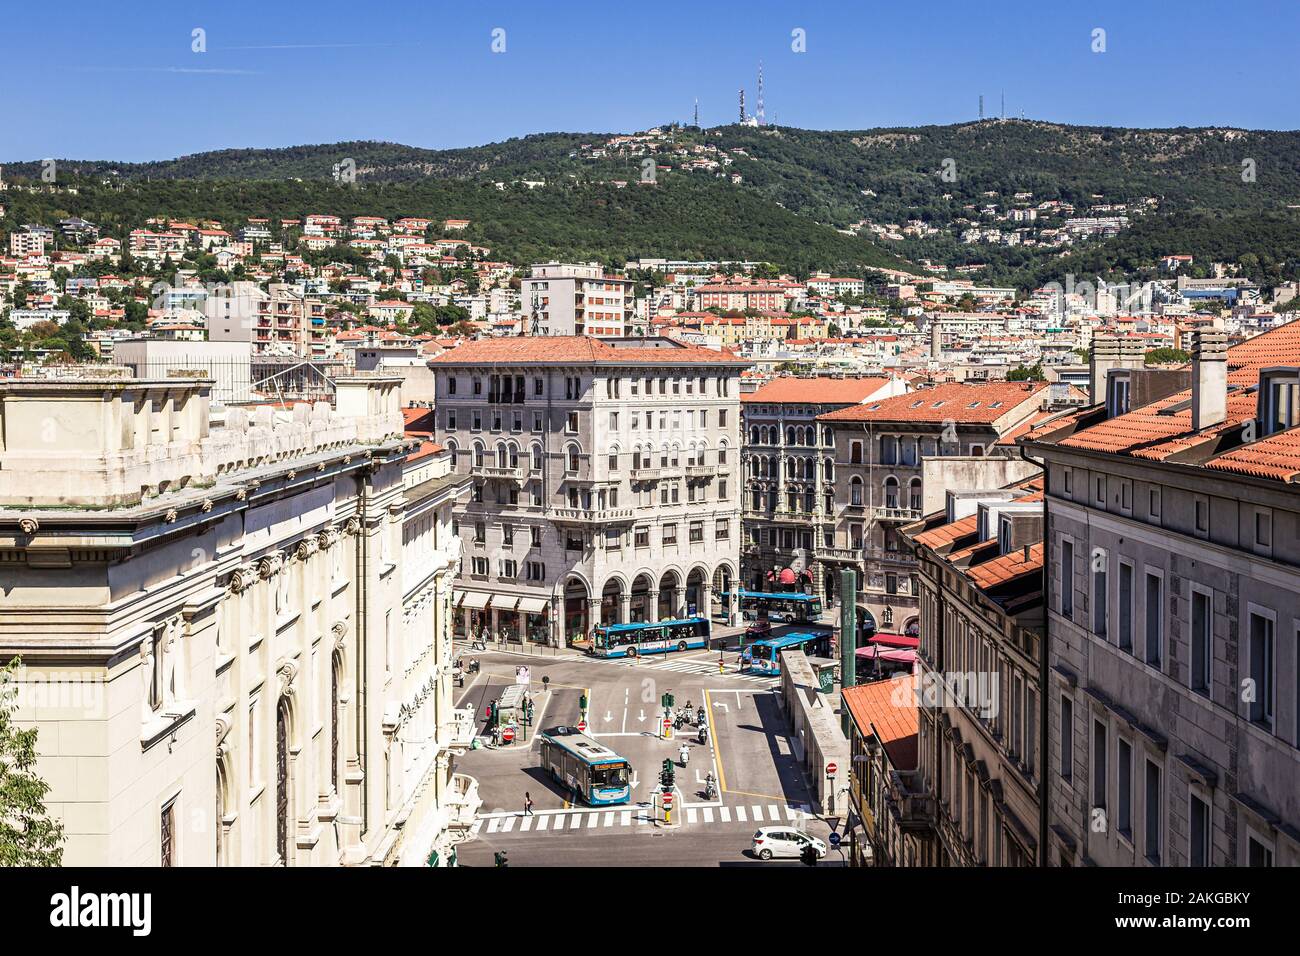 View of the piazza carlo goldoni in trieste, italy, from the scala dei giganti. Skyline, theater and university visible. Stock Photo